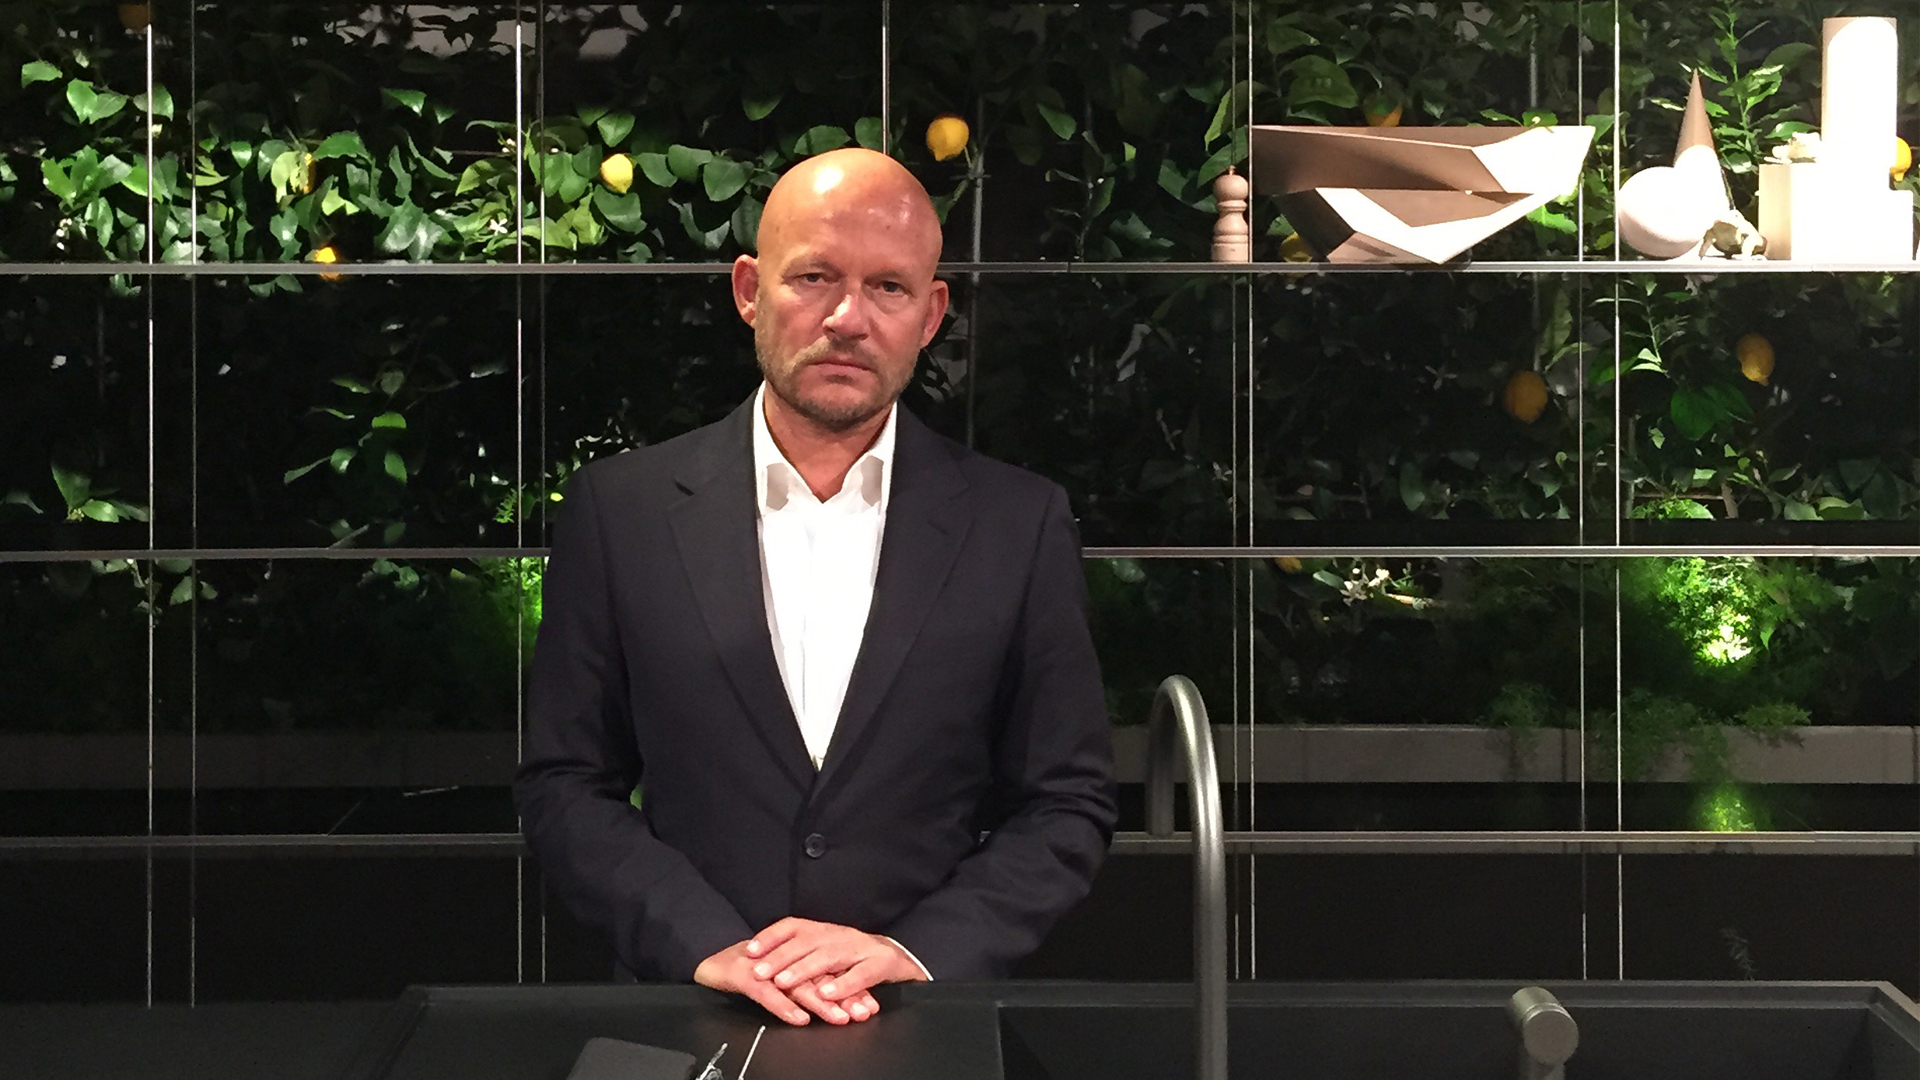 Vincent Van Duysen appointed new creative director of the Molteni&C and Dada brands